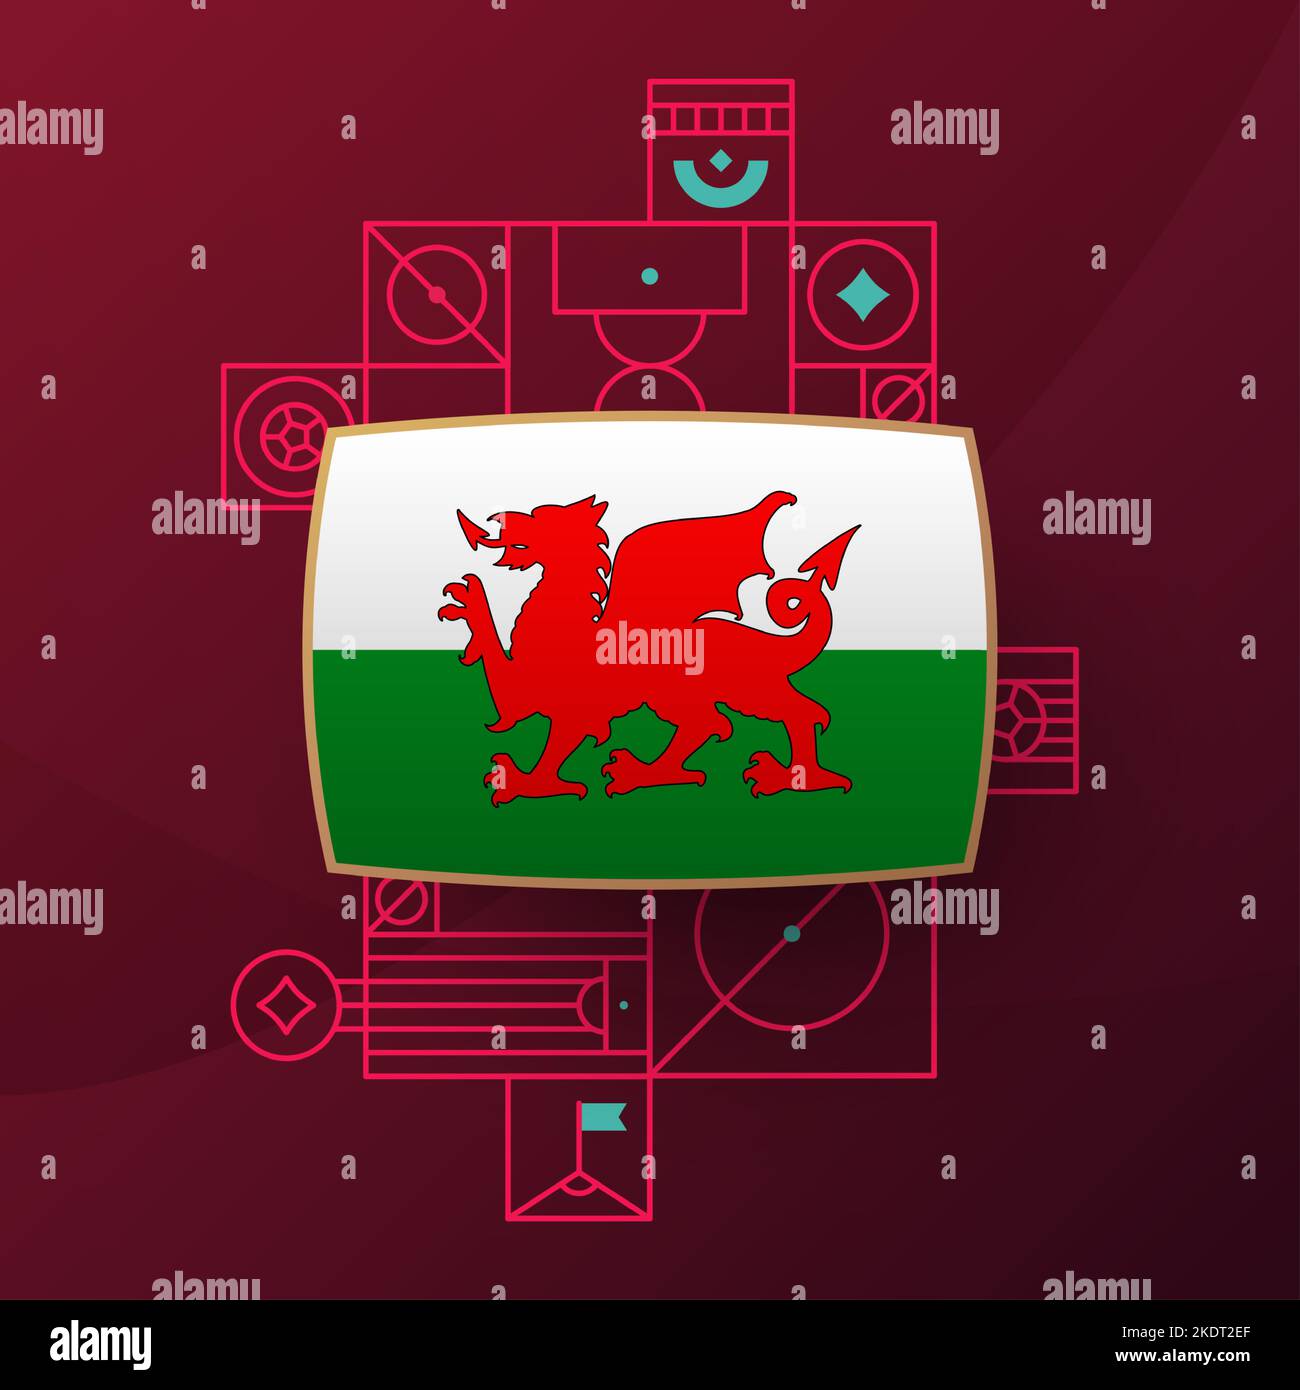 wales flag for 2022 football cup tournament. isolated National team flag with geometric elements for 2022 soccer or football Vector illustration. Stock Vector